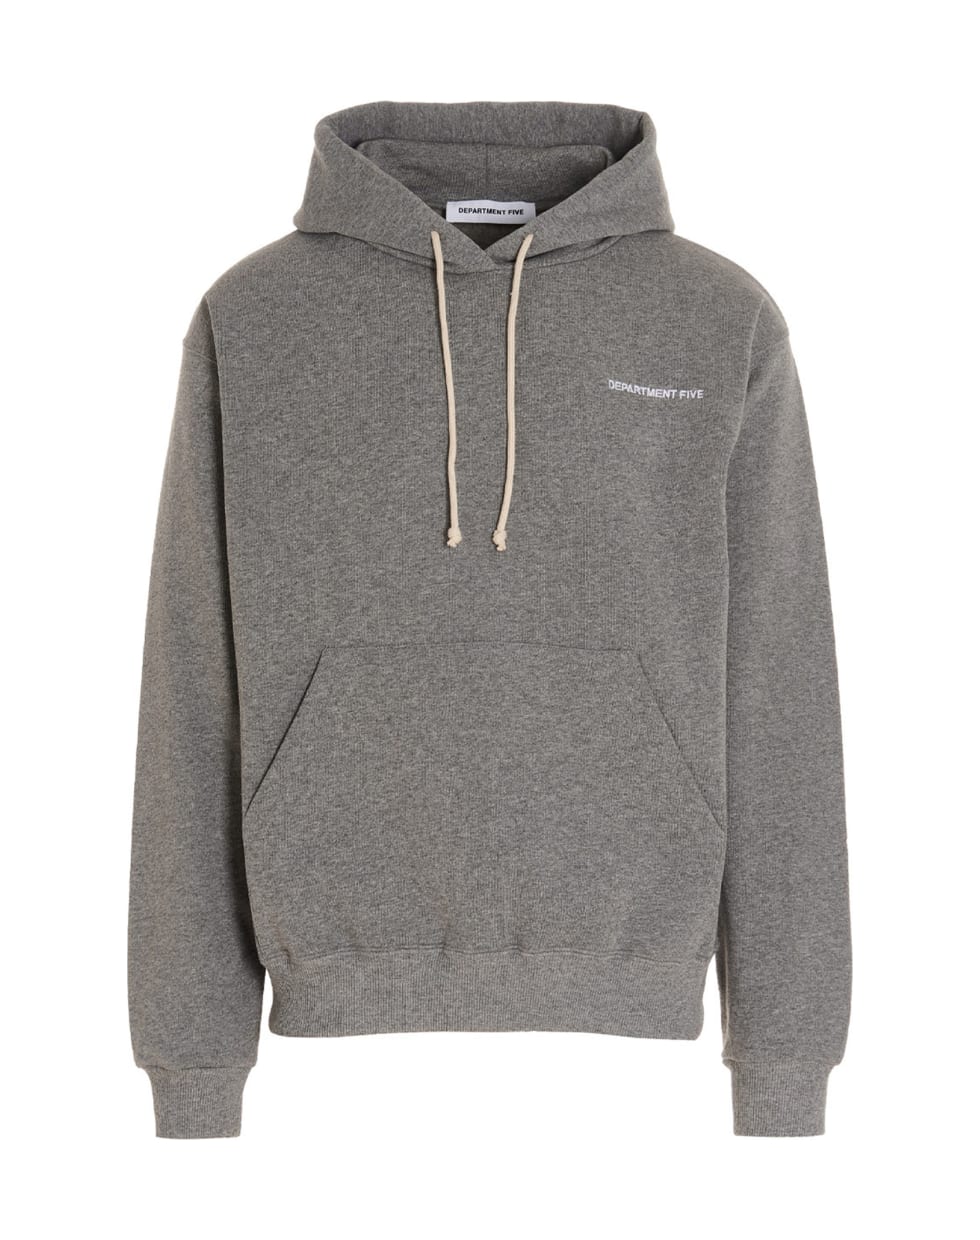 Department Five 'shend' Sweater - Grey